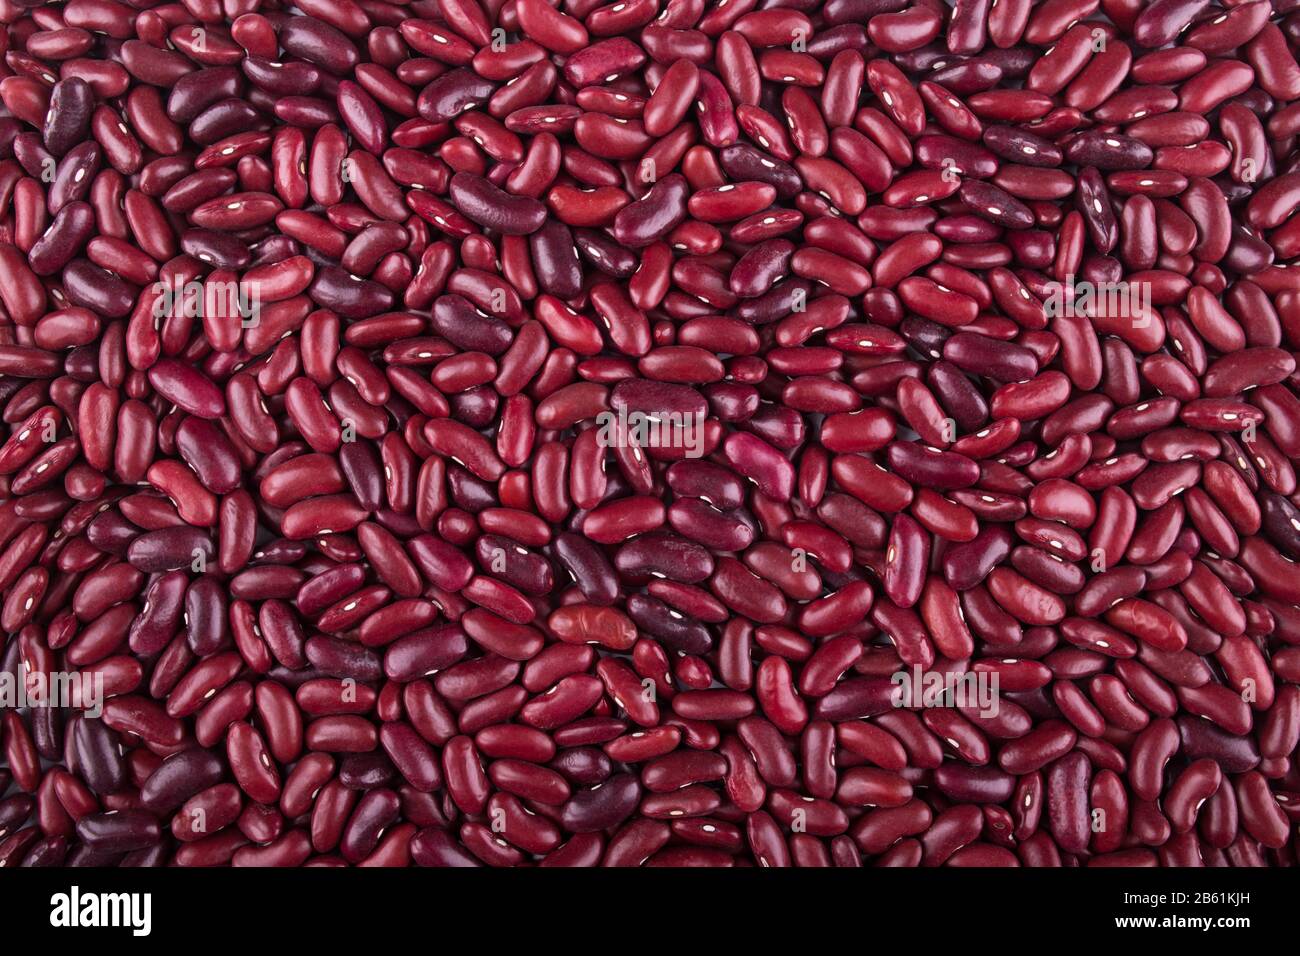 Background from a layer of red large beans. Brown bean solid background. Stock Photo